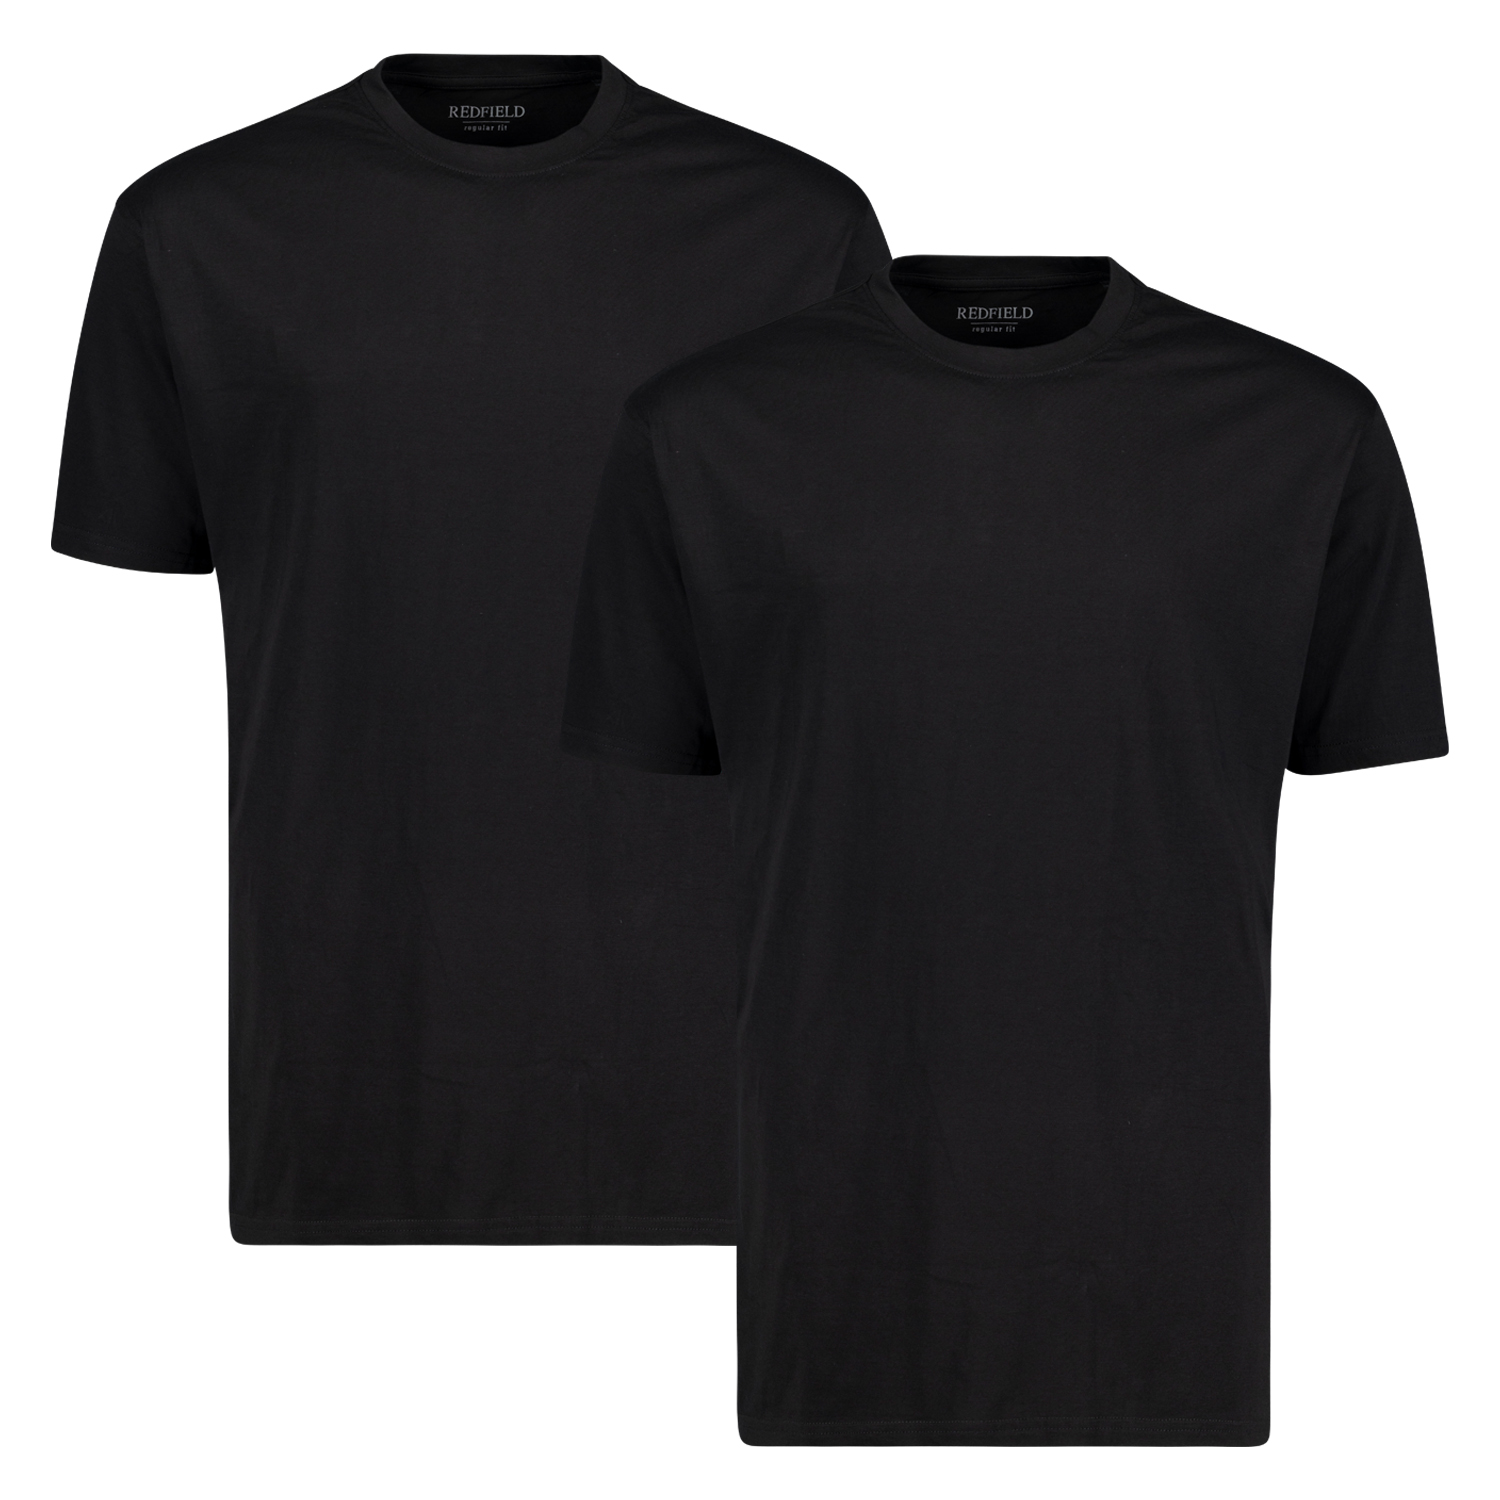 Pair of two crew neck t-shirts in black by Redfield in extra large sizes until 10XL